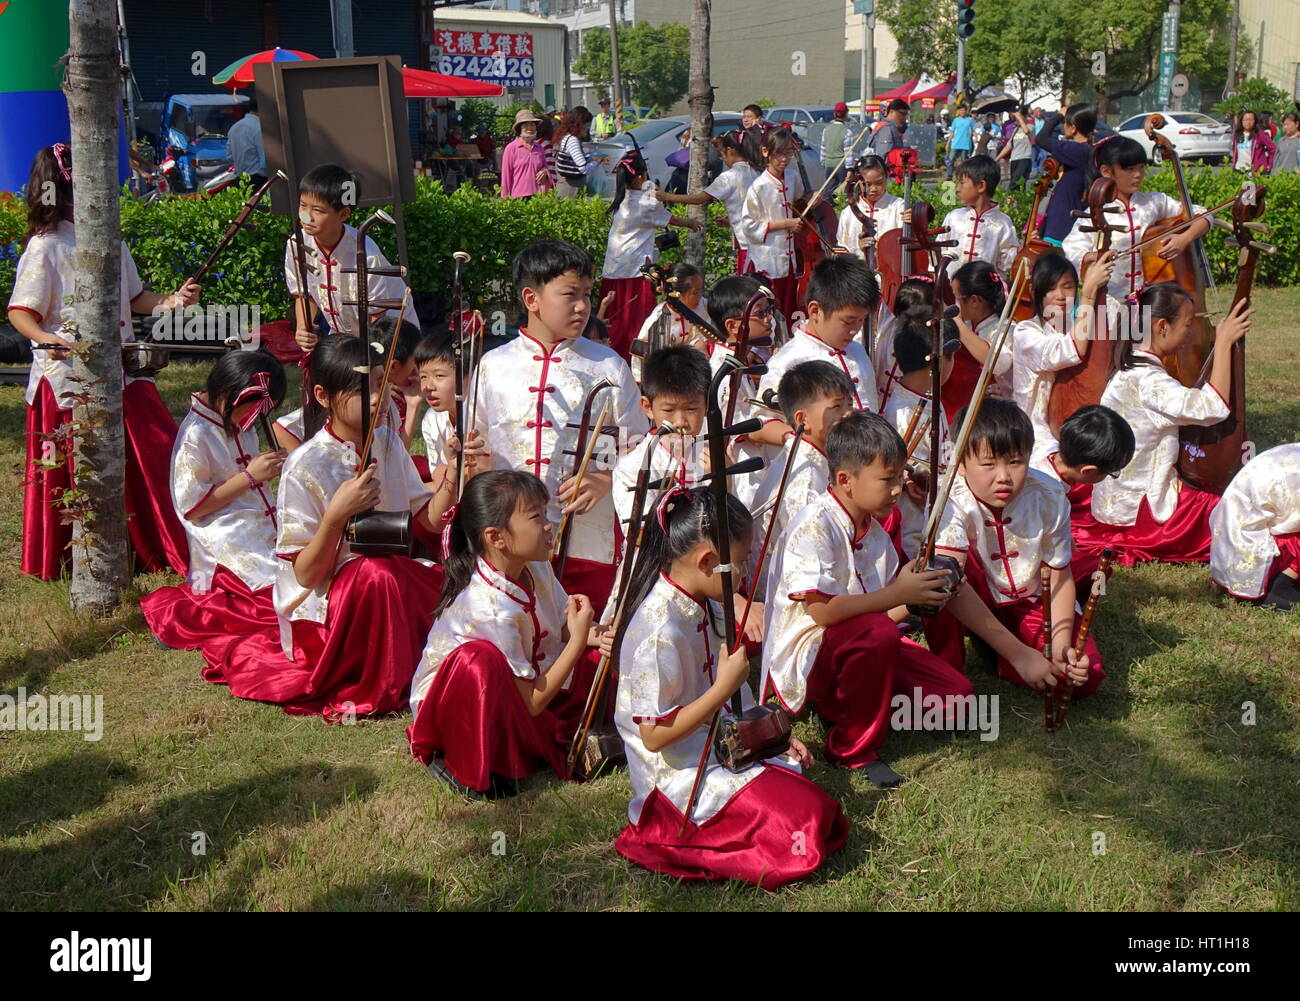 LUJHU, TAIWAN -- DECEMBER 12, 2015: A children's orchestra for traditional Chinese music waits for their performance at the 2015 Lujhu Tomato Festival Stock Photo